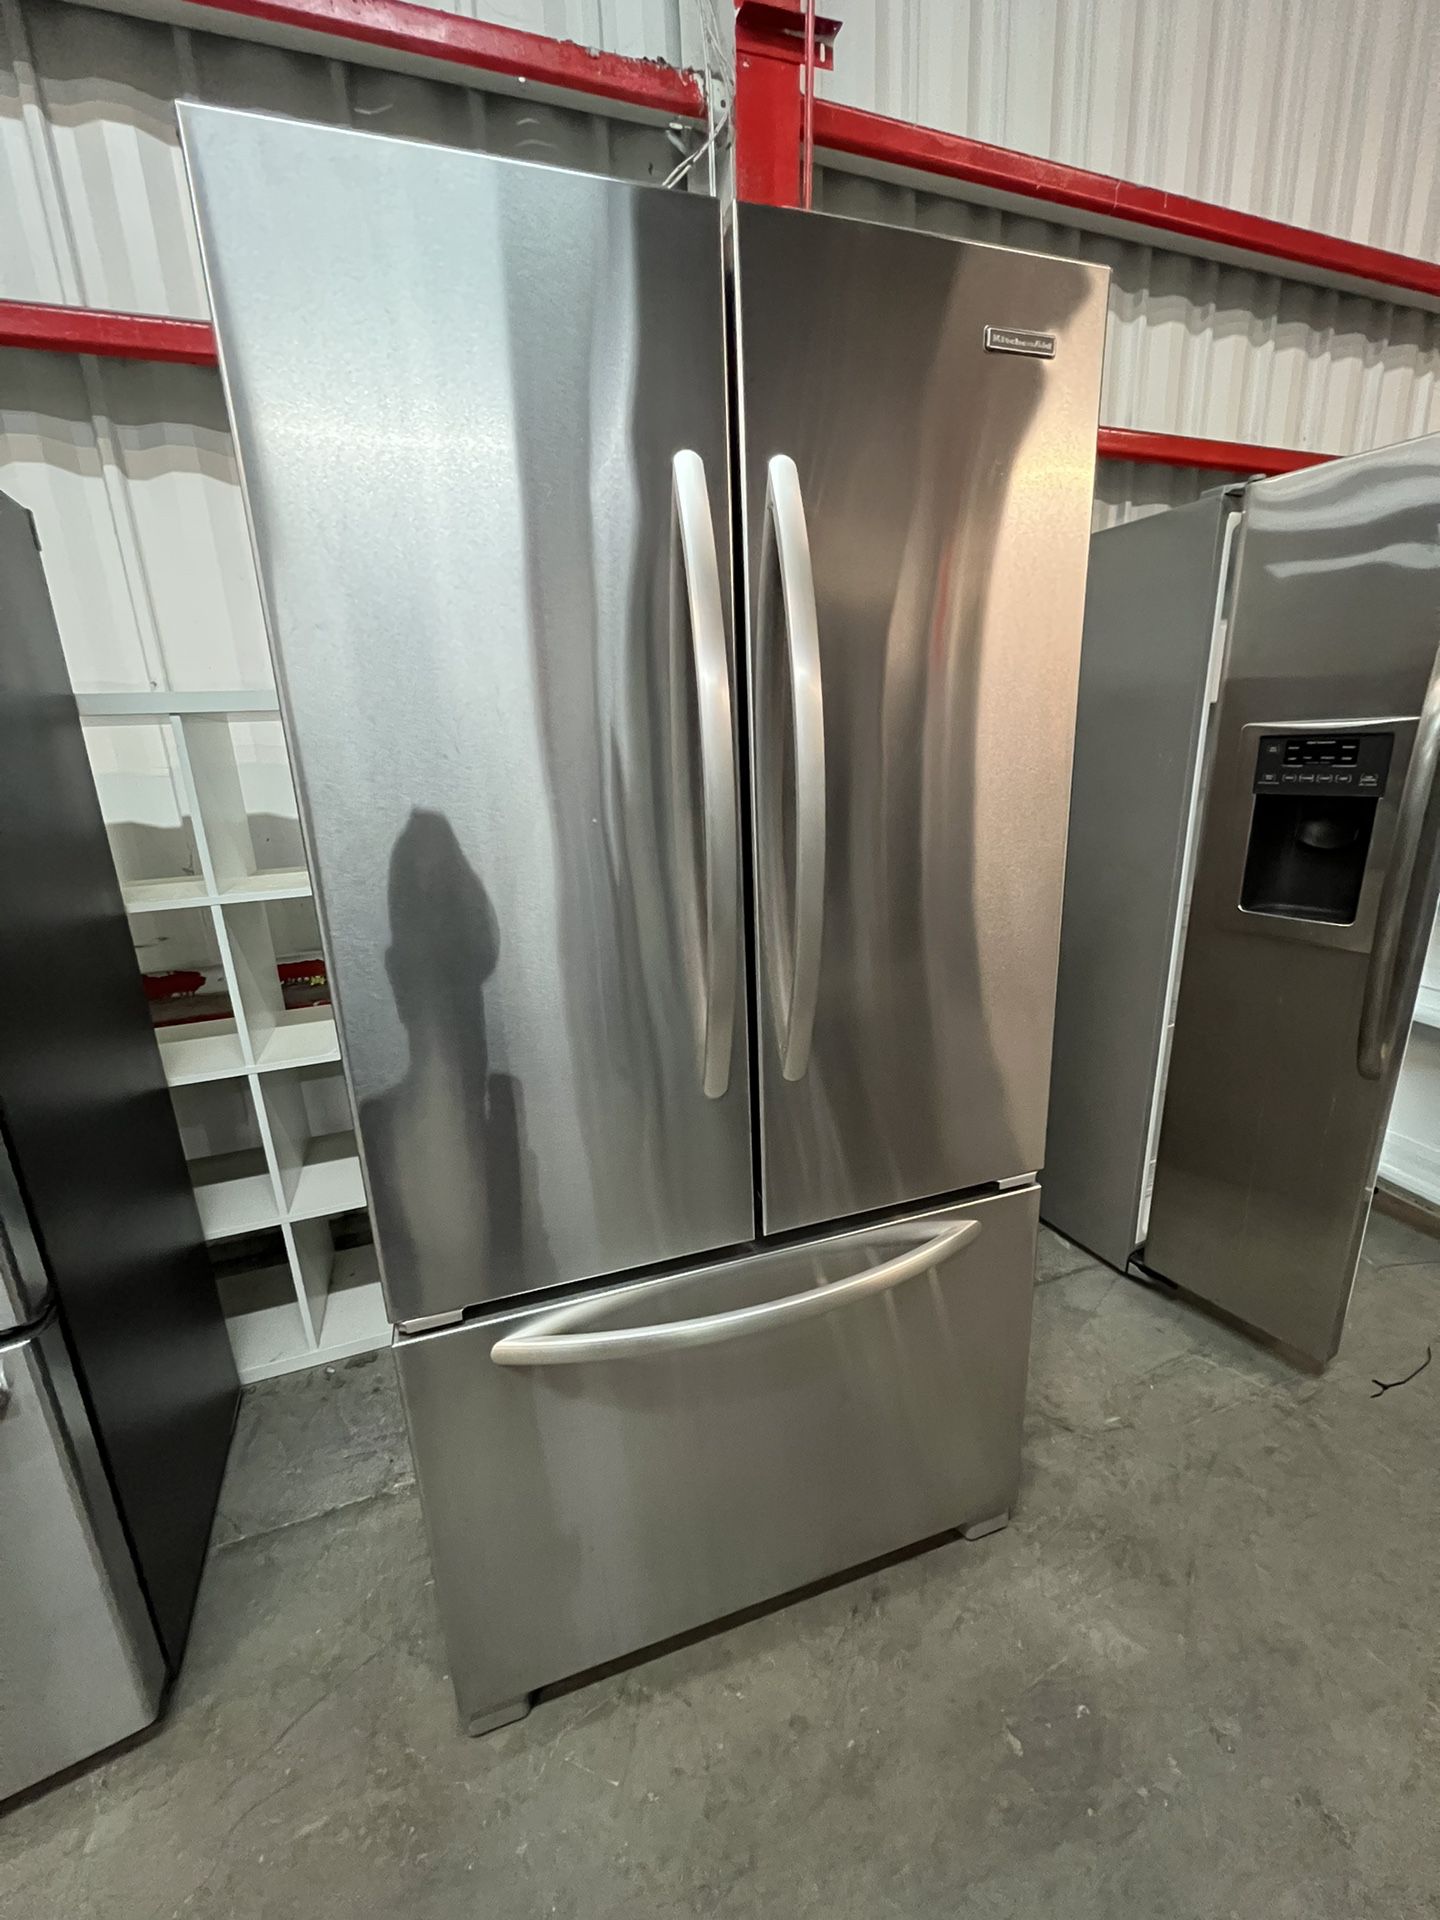 Kitchenaid Counter Up Refrigerator With Internal Ice And Water